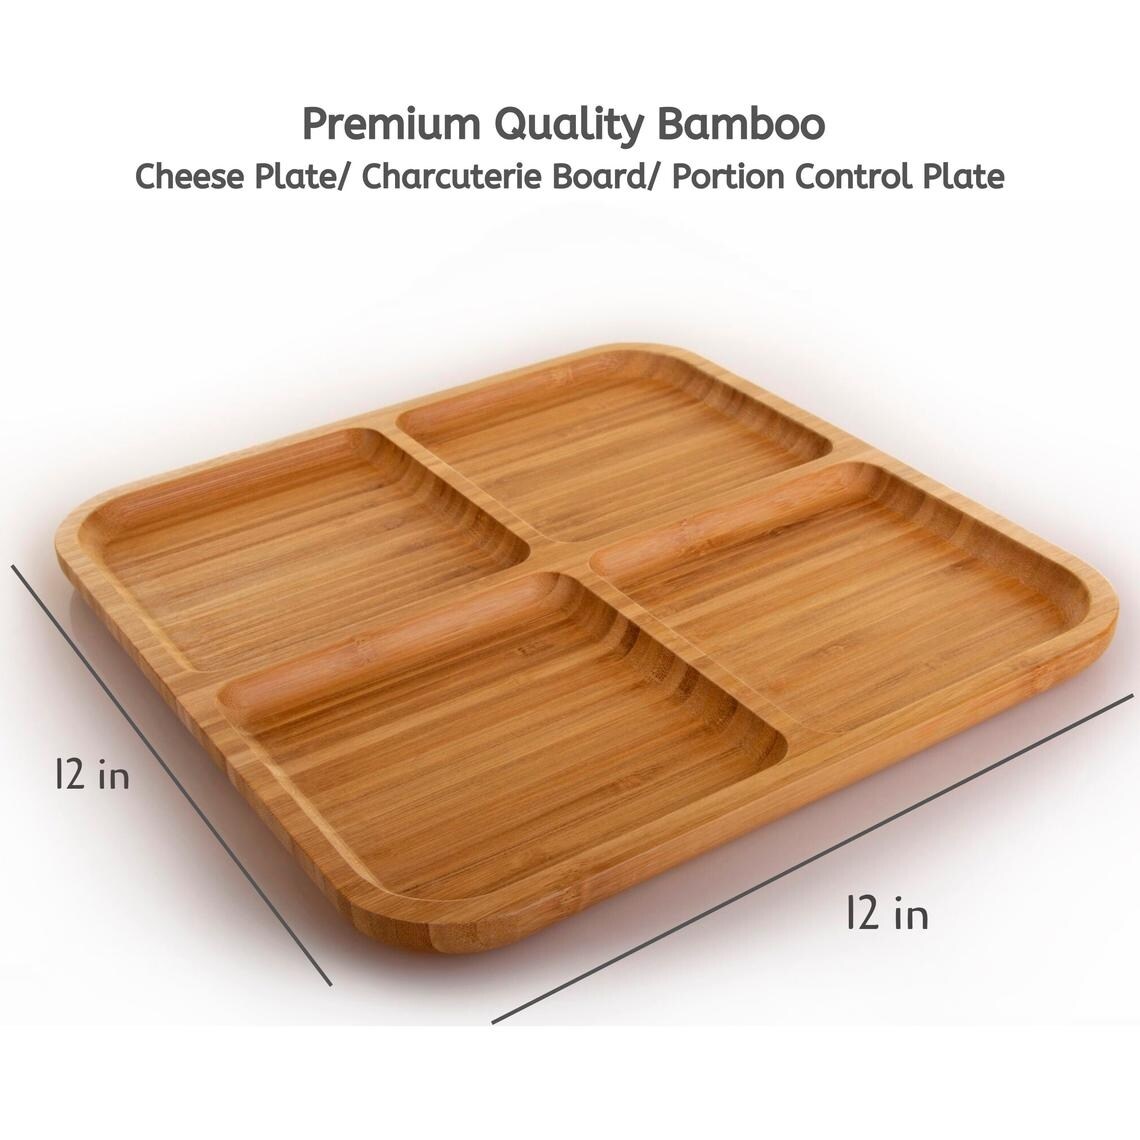 https://ak1.ostkcdn.com/images/products/is/images/direct/99c471631edaa5e36ea6a8821b6afc7712e32ed3/Organic-Bamboo-Platter%2C-Serving-Platter%2C-Sectional-Wooden-Dish-For-Appetizers-%26-Snacks.jpg